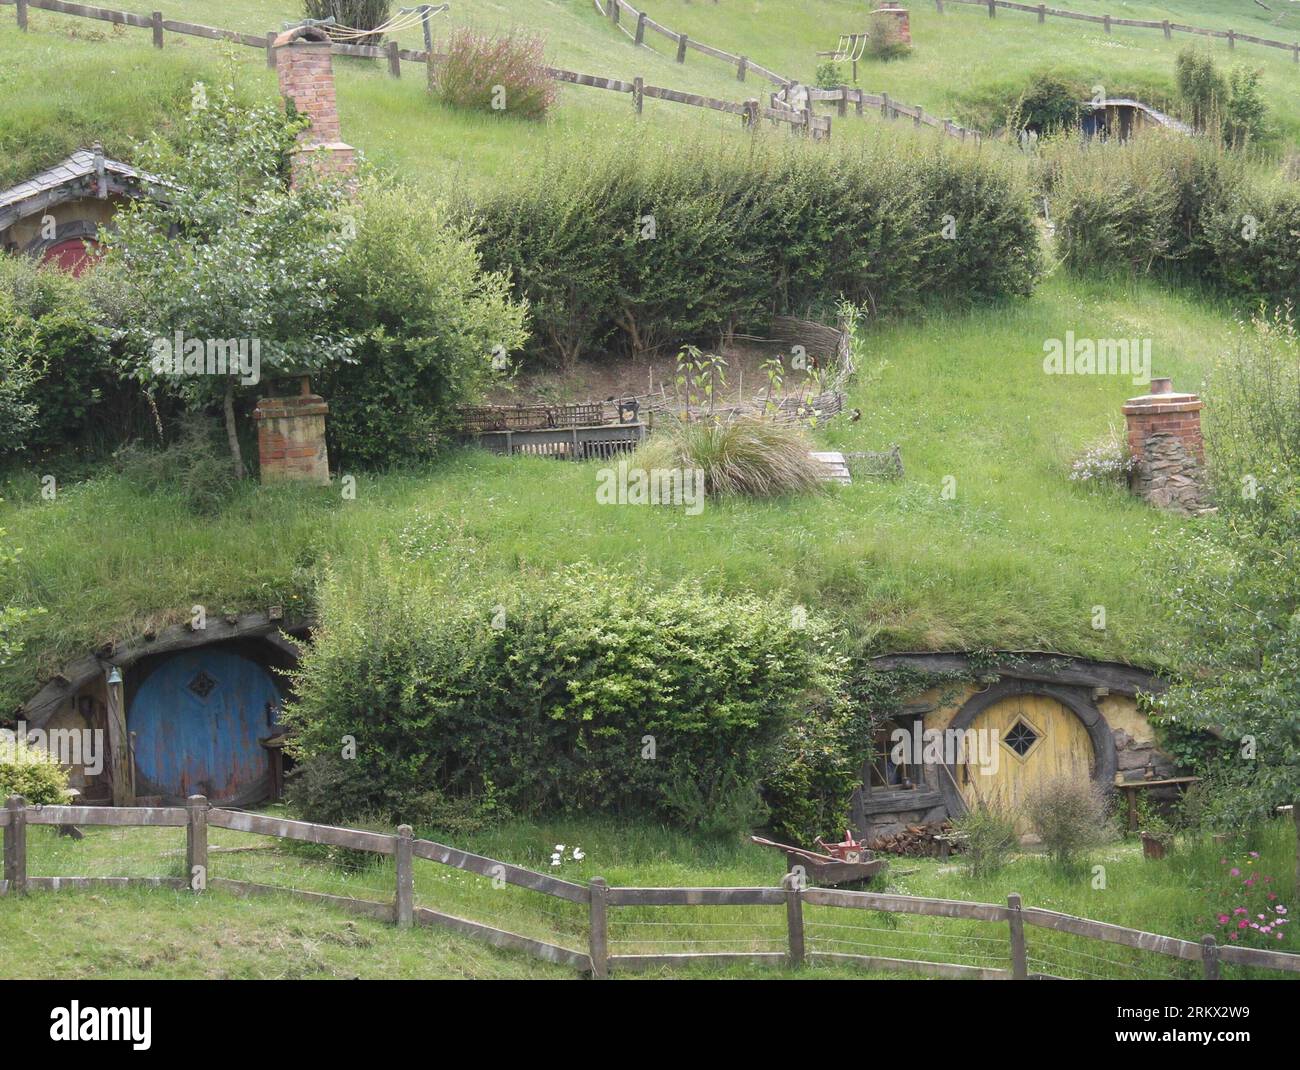 WELLINGTON -- Photo taken on Nov. 29, 2012 shows the Hobbit movie s filming location at Hobbiton on the Alexander family farm near New Zealand s north island town of Matamata. The film set of The Hobbit: An Unexpected Journey is such fantastic in the rolling countryside that closely resembled the Shire in the popular classics by J.R.R Tolkien, attracting a lot of fans and tourists. (Xinhua/Liu Jieqiu) Authorized by ytfs NEW ZEALAND-WELLINGTON-FILM-HOBBIT-HOBBITON PUBLICATIONxNOTxINxCHN   Wellington Photo Taken ON Nov 29 2012 Shows The Hobbit Movie S filming Location AT Hobbiton ON The Alexande Stock Photo